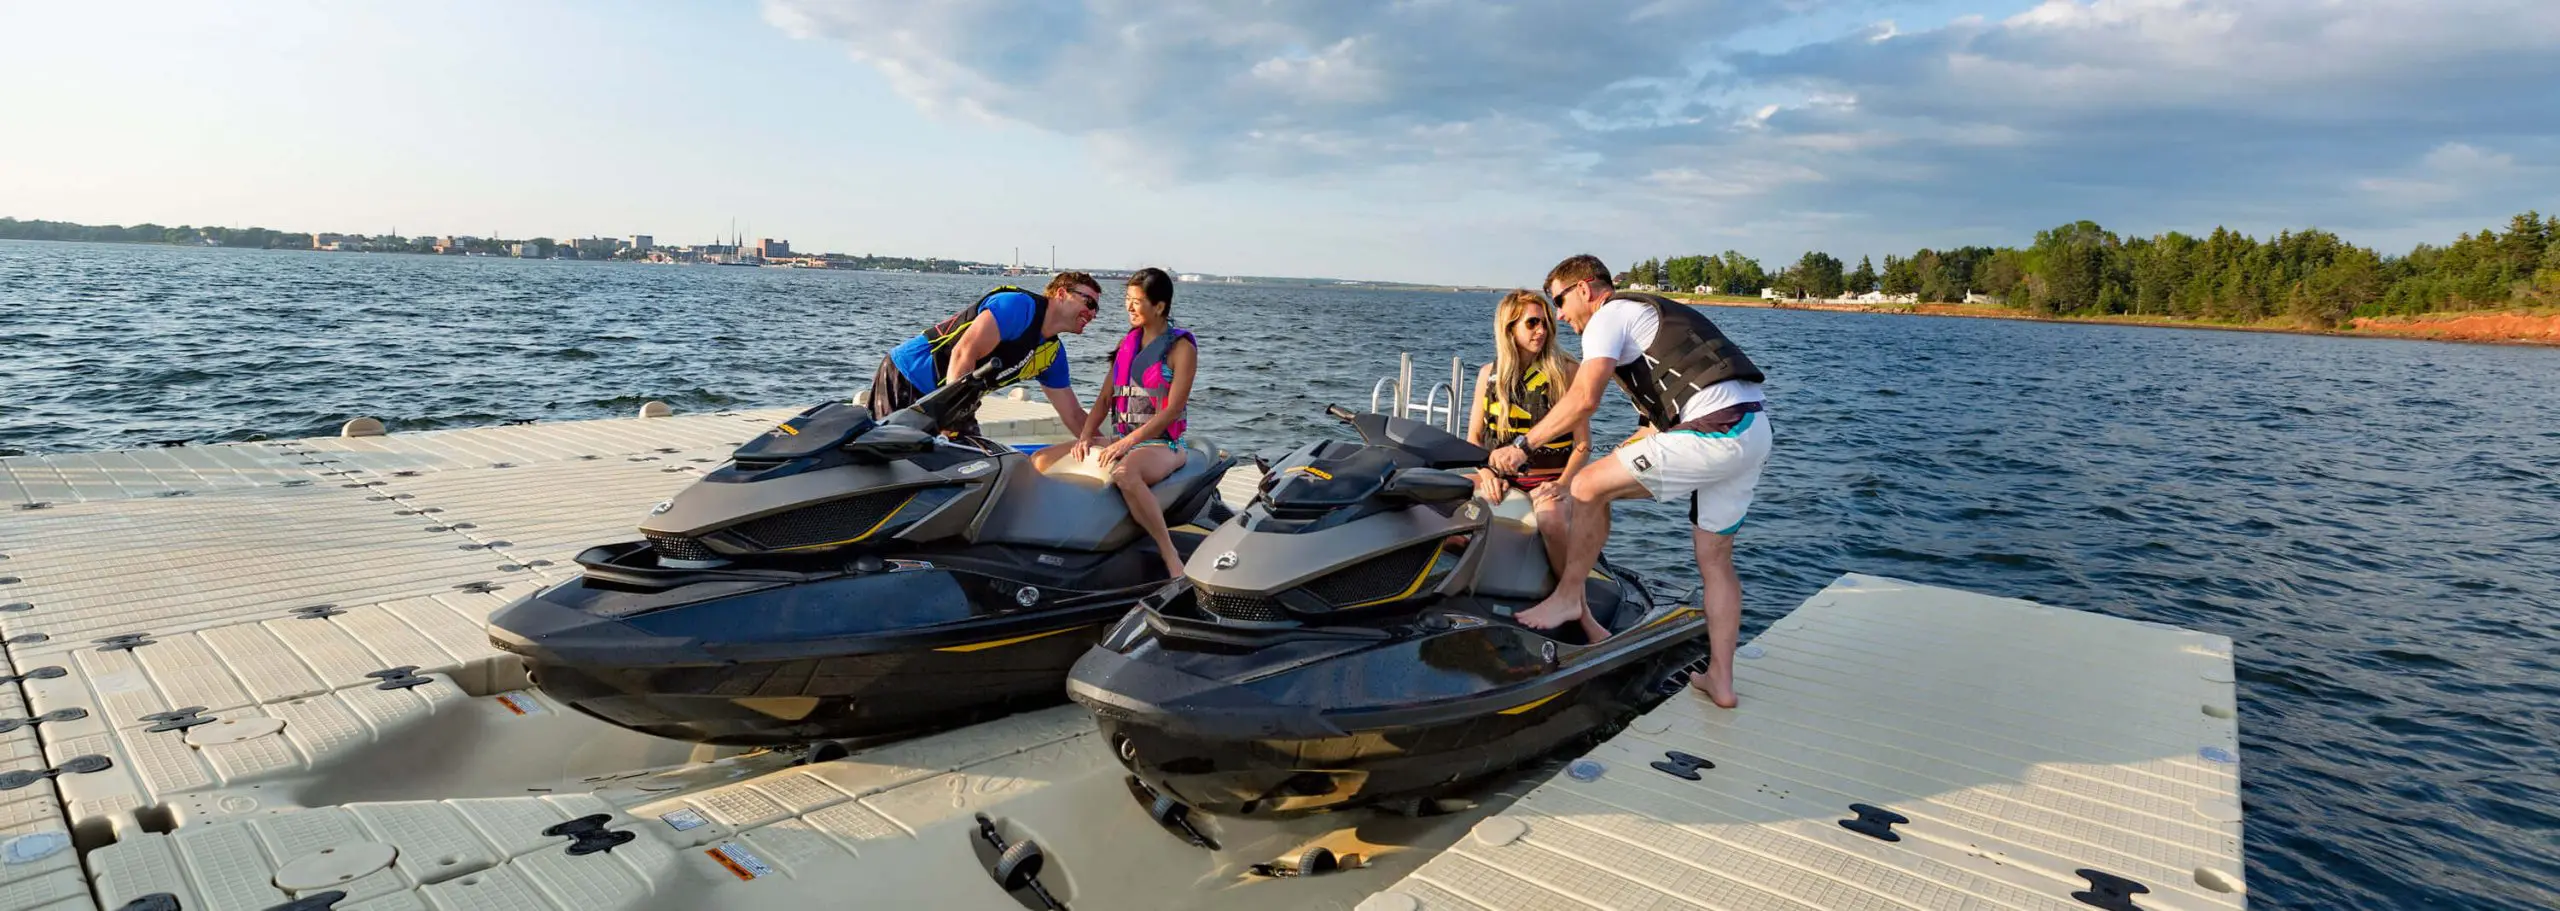 Two couples mounting on 2 jet skis